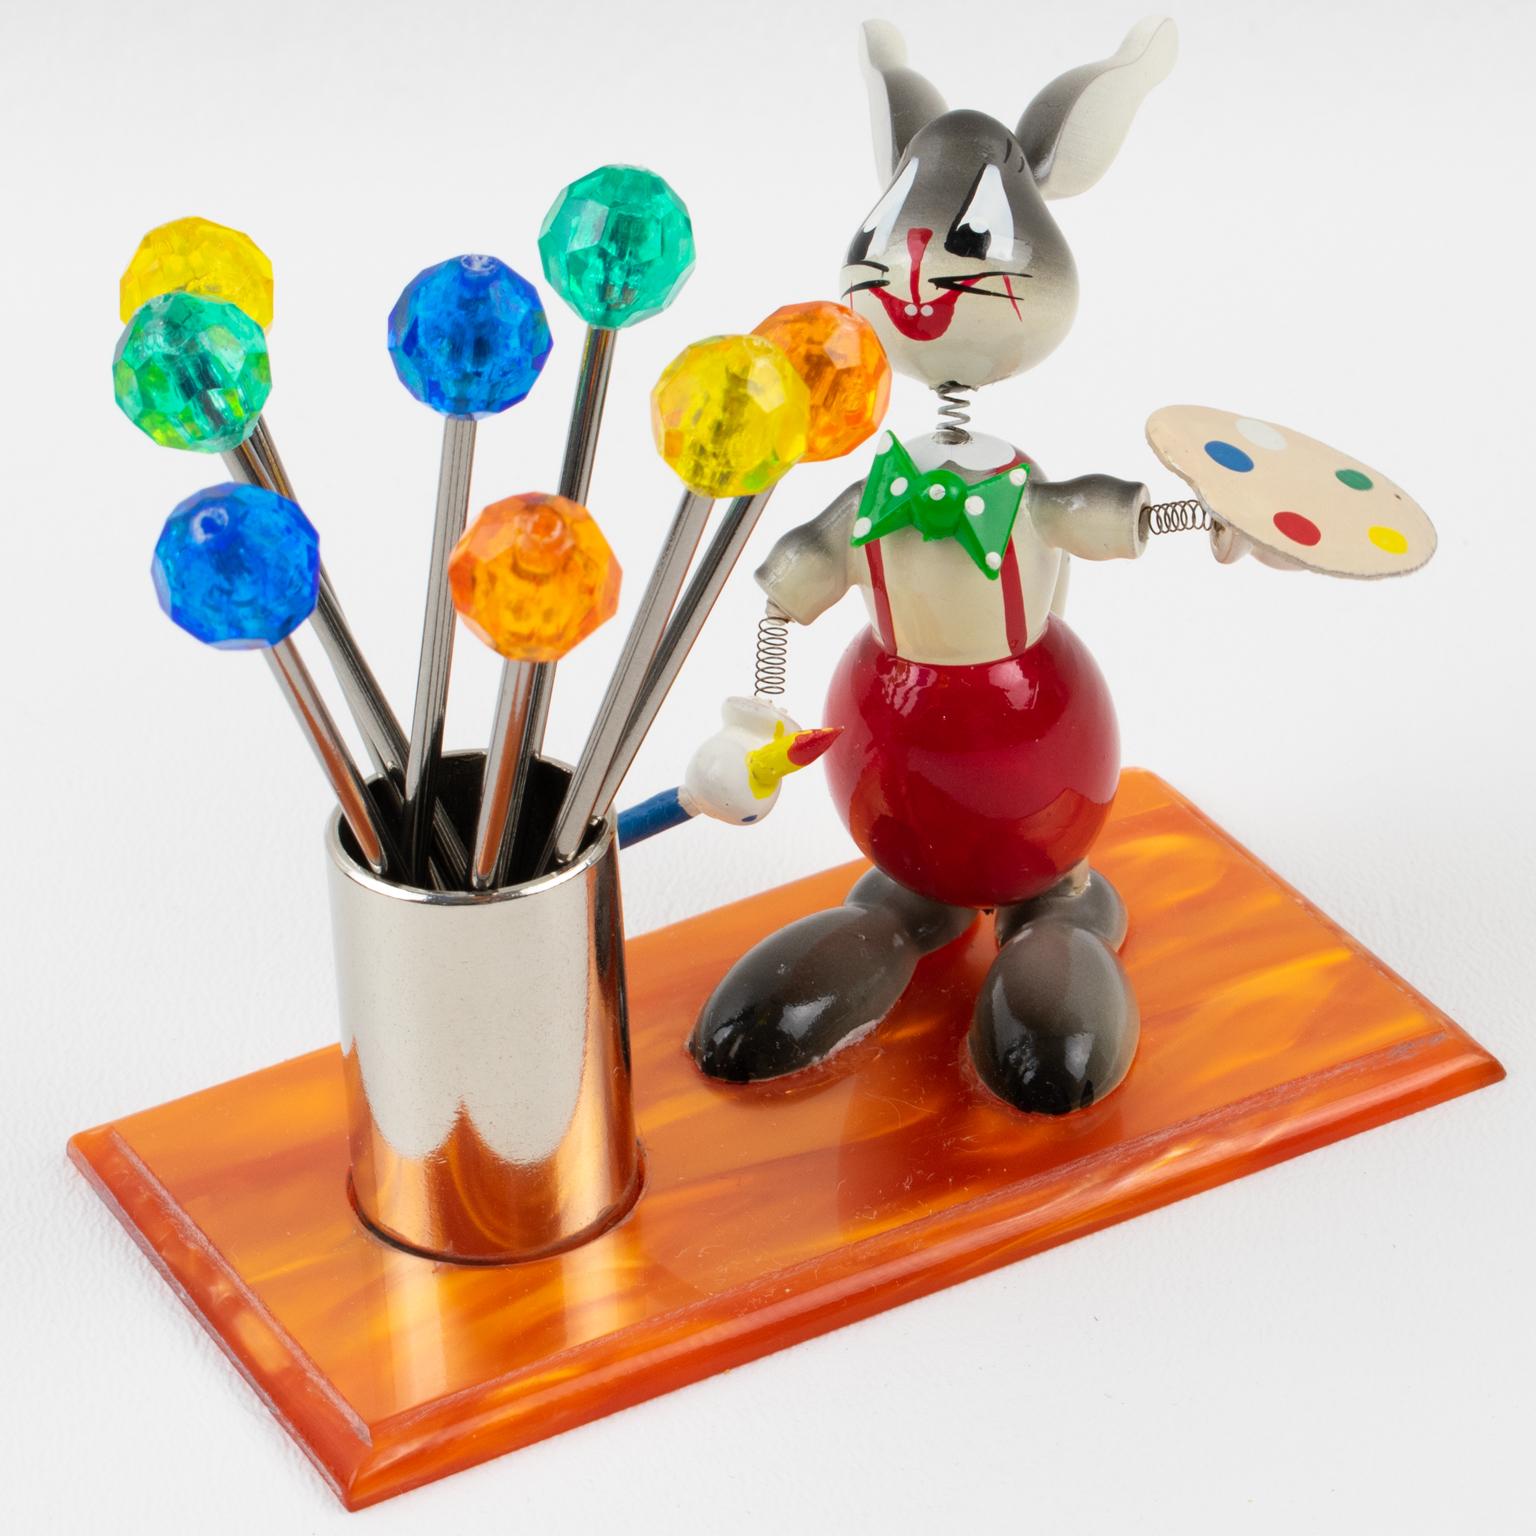 This adorable French Mid-Century bar cocktail pick accessory was crafted in France in the 1960s. This little guy is probably not Picasso, but he will be a great conversational piece for your next party with friends !!
The bar set includes a wooden